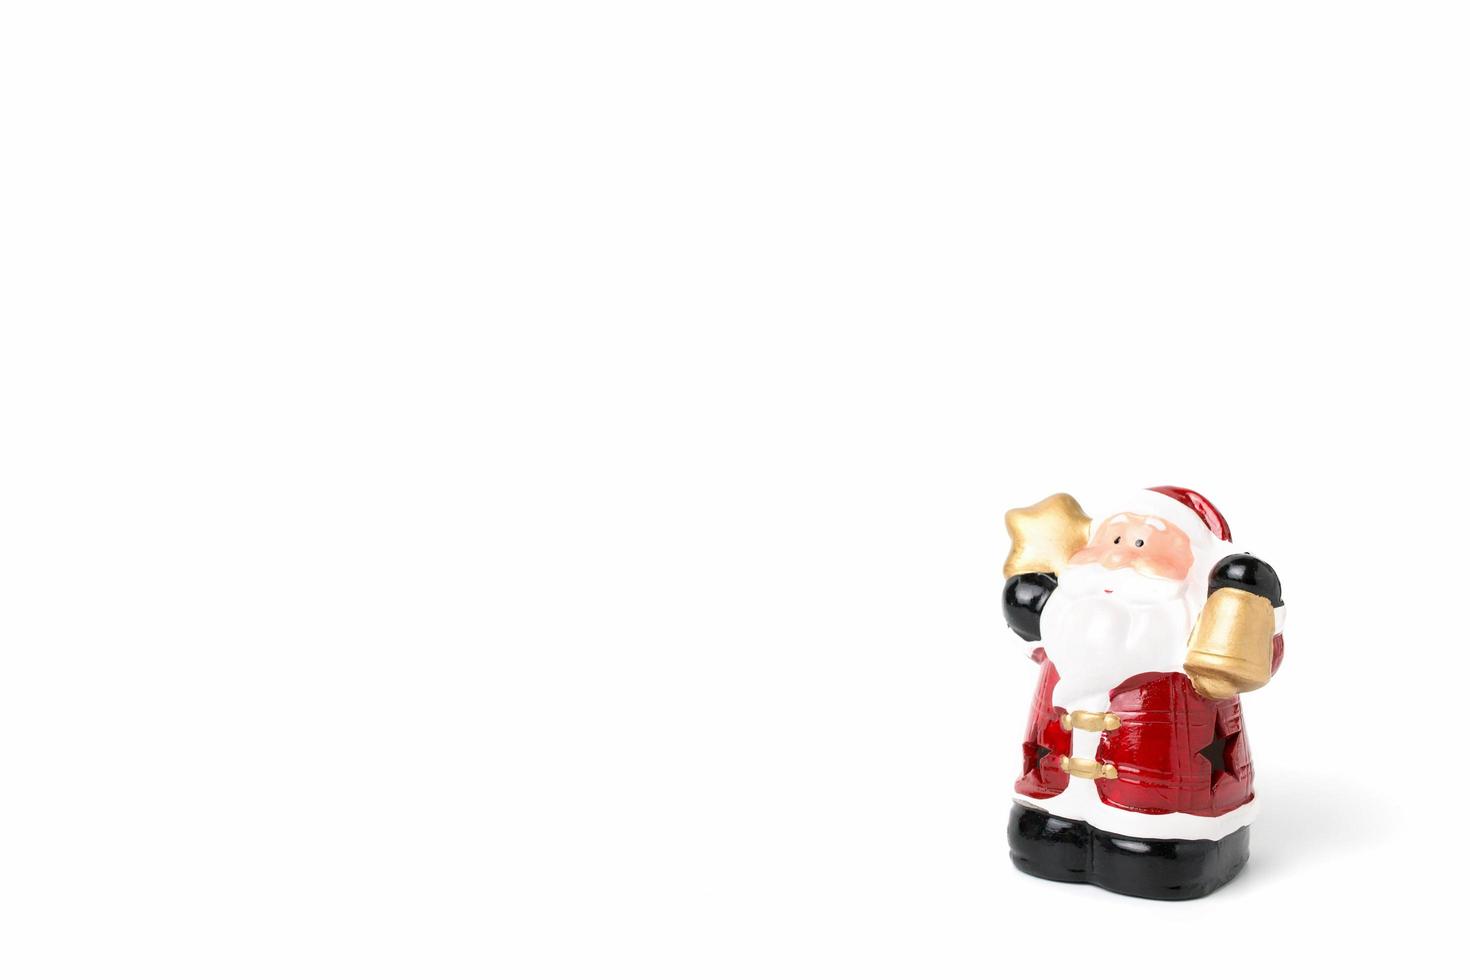 Figurine of Santa Claus on a white background photo